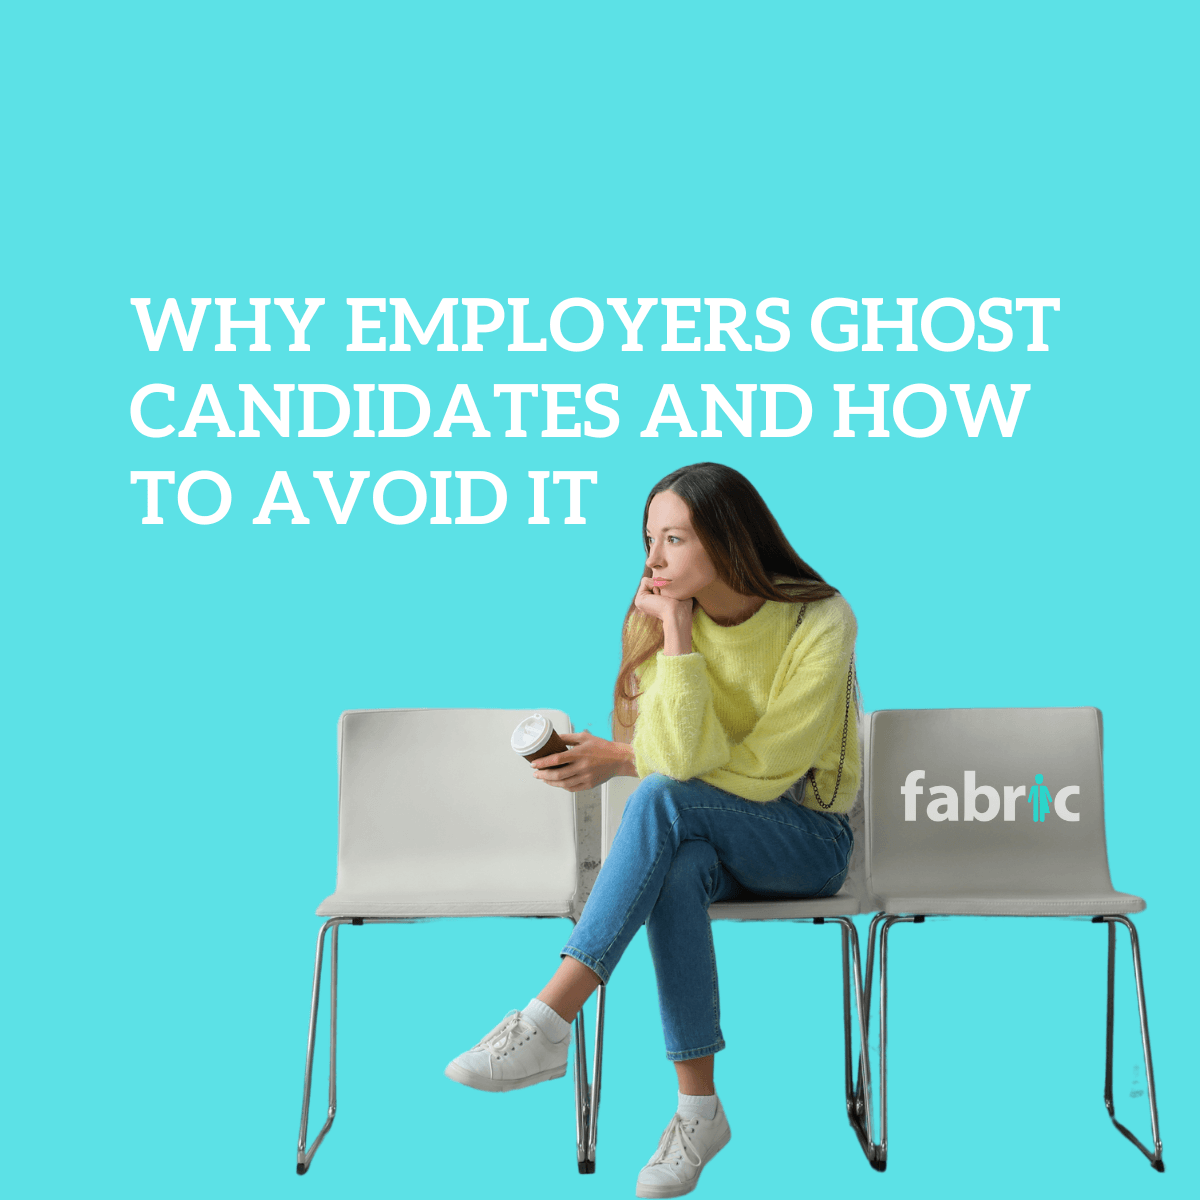 Why employers ghost candidates and how to avoid it